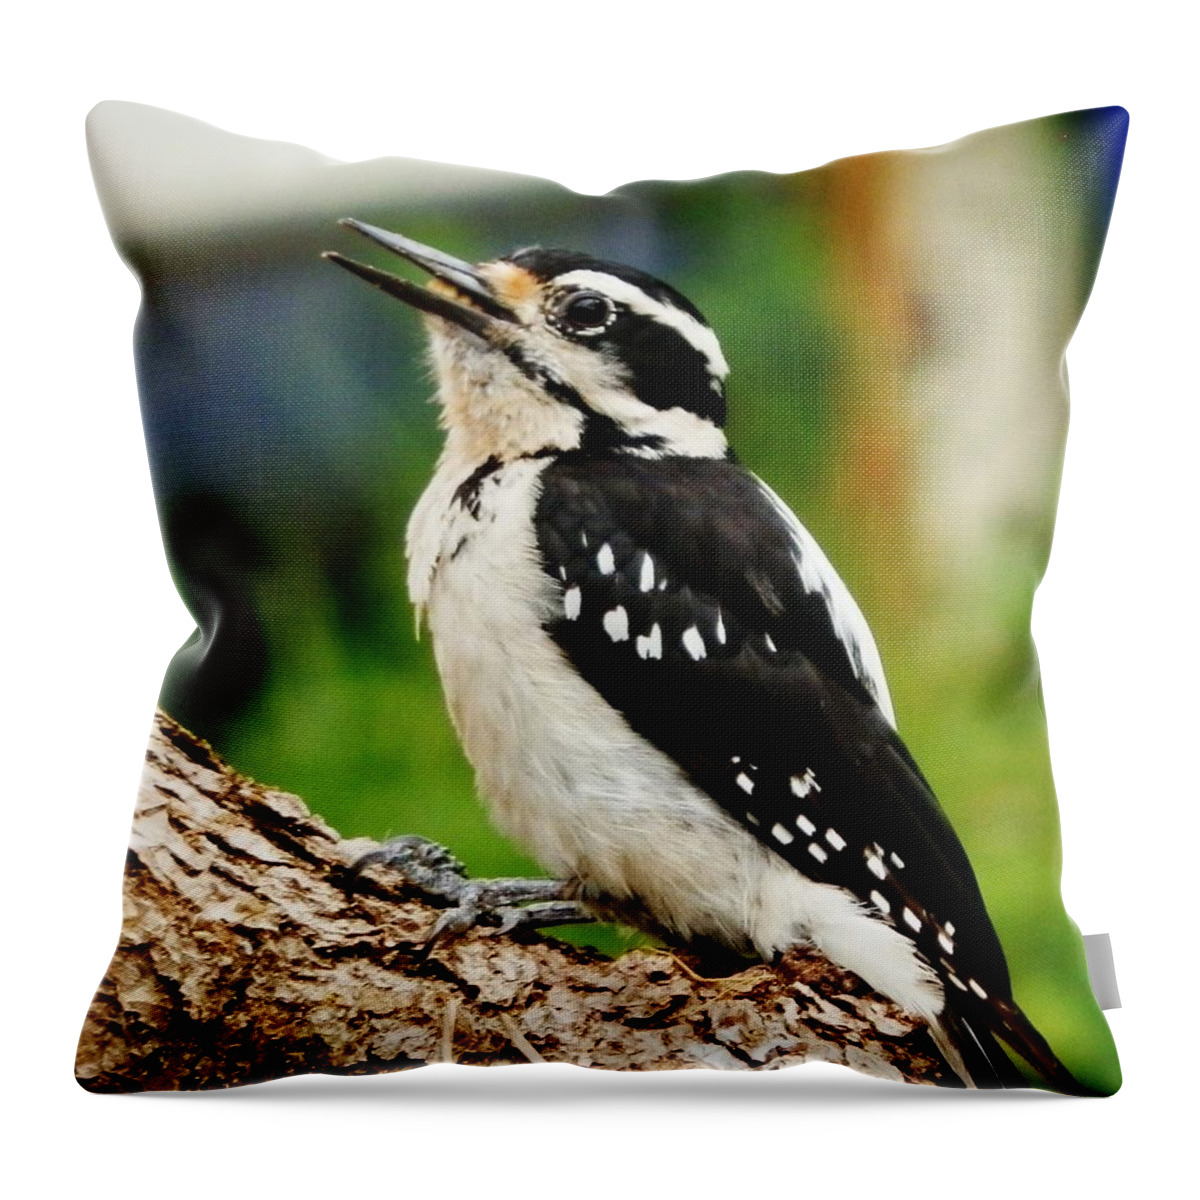 Woodpecker Throw Pillow featuring the photograph Young Hairy Woodpecker by VLee Watson